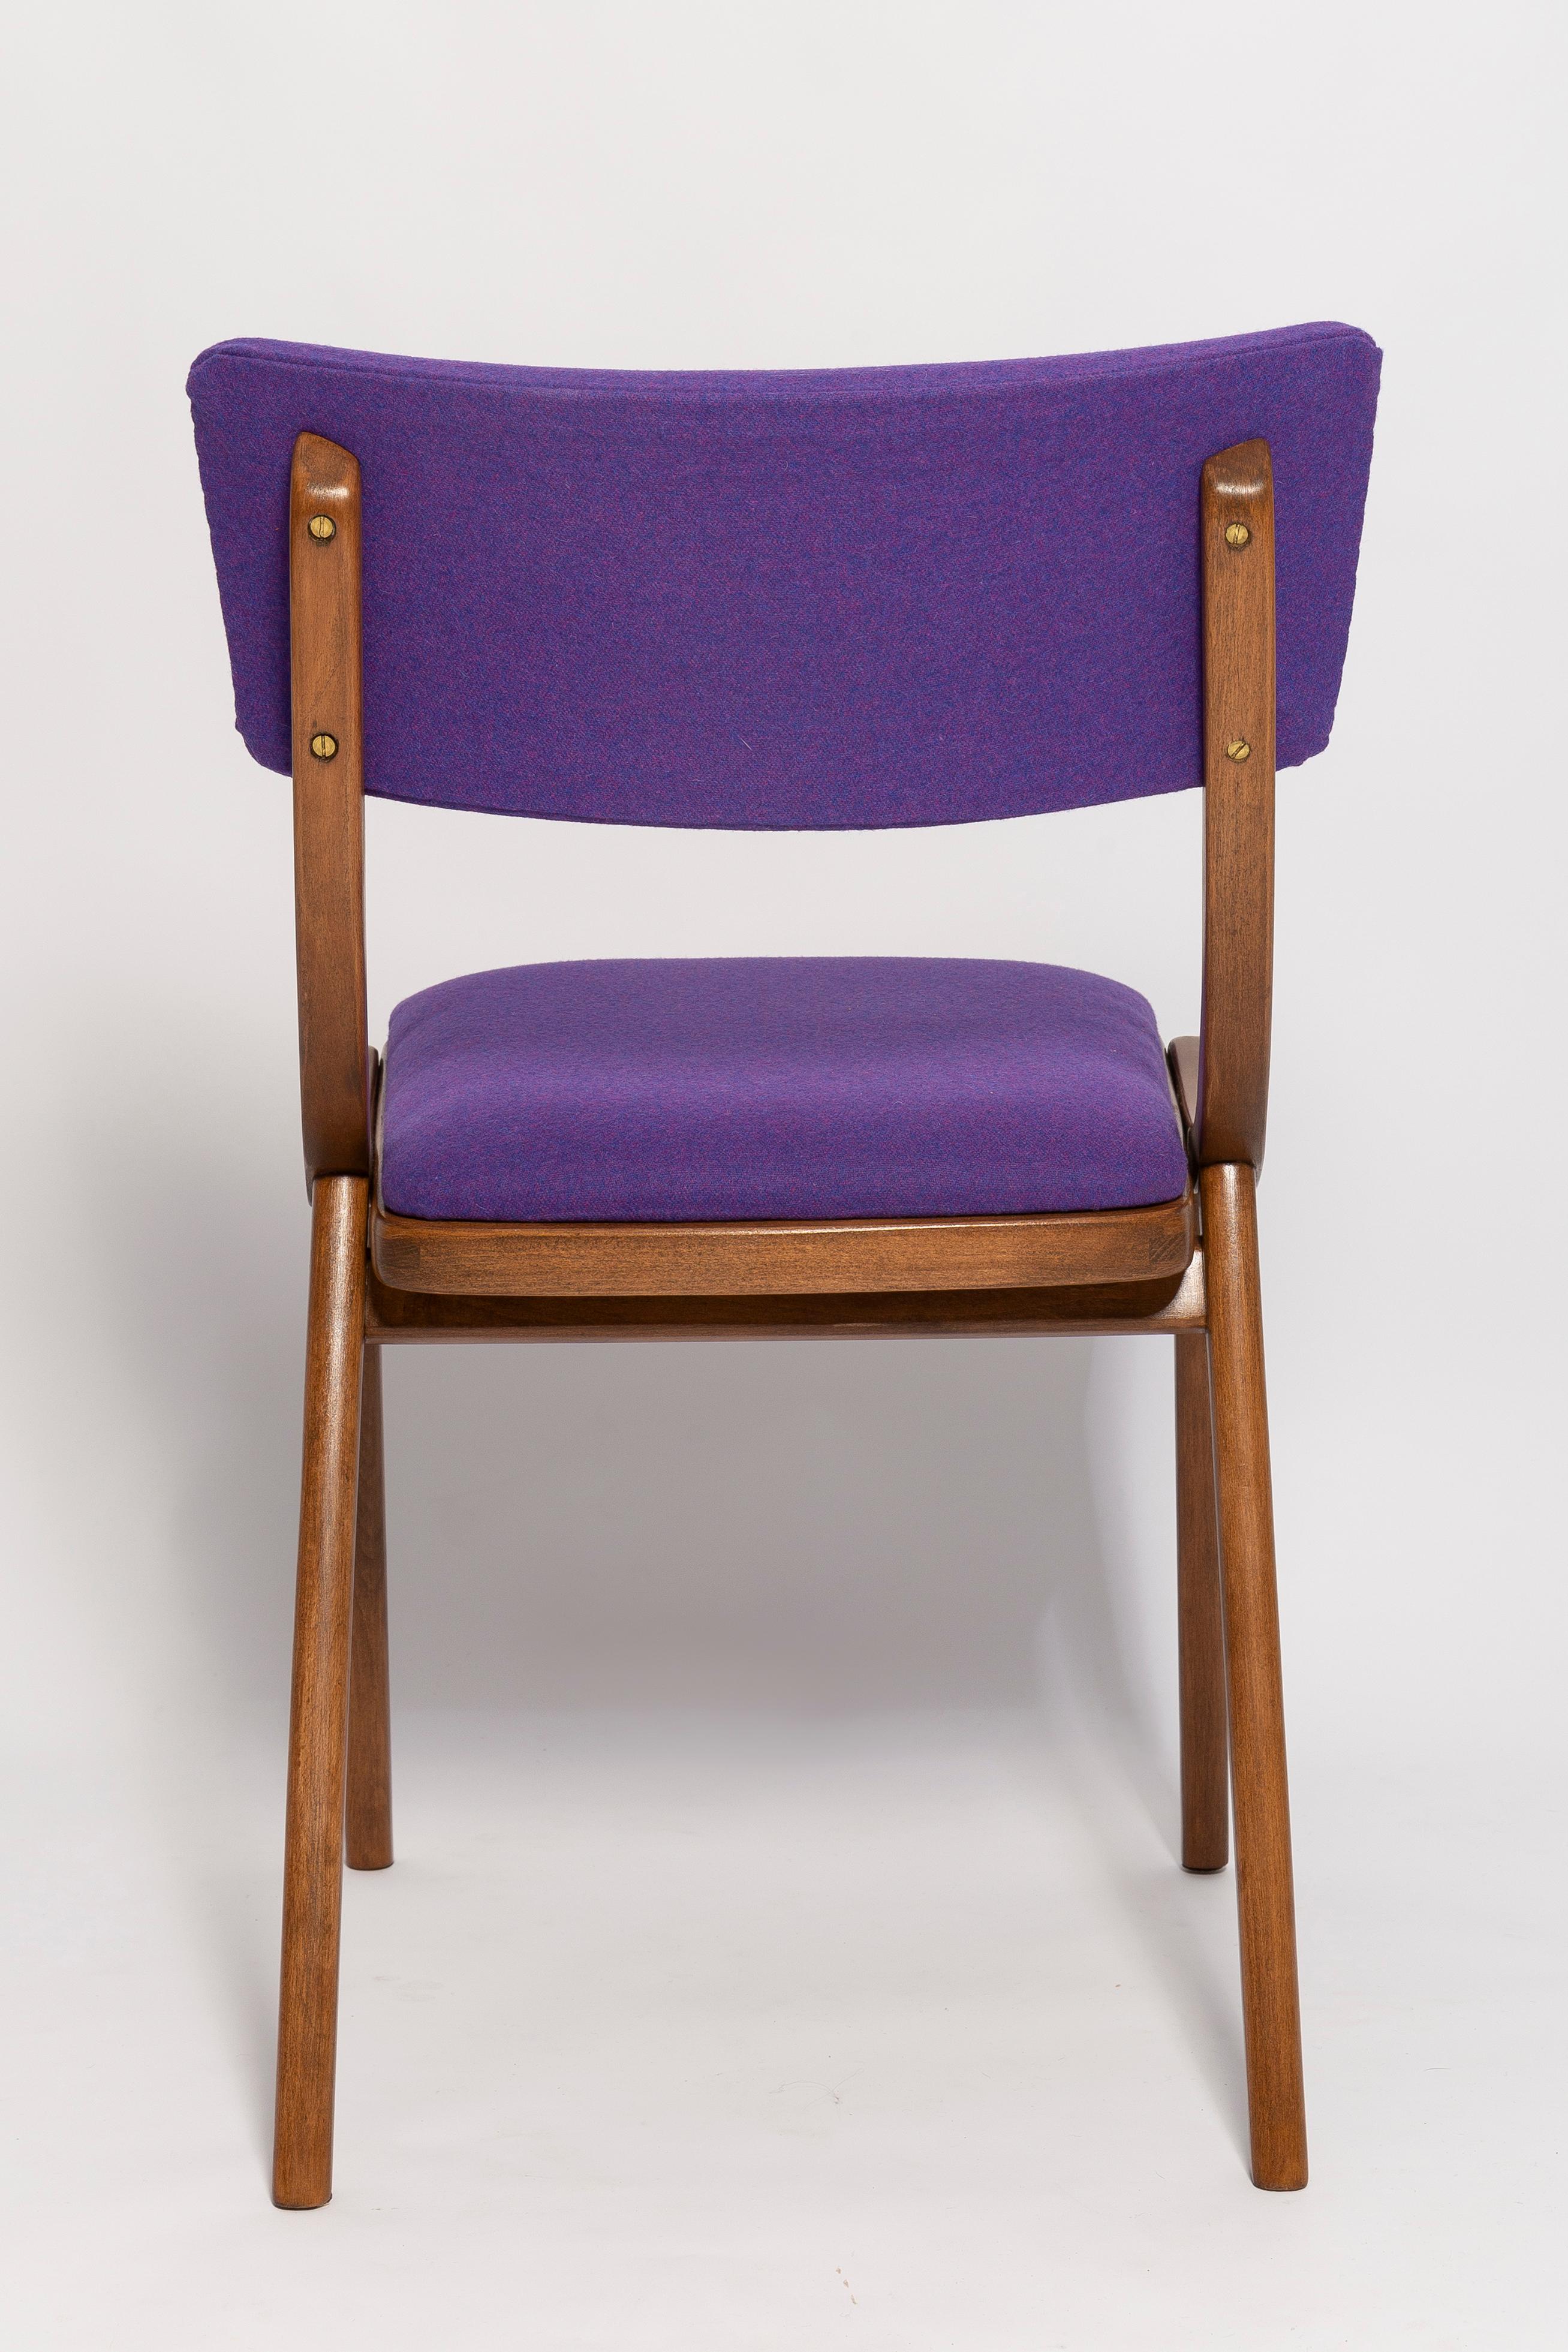 Six Mid Century Modern Bumerang Chairs, Purple Violet Wool, Poland, 1960s For Sale 6